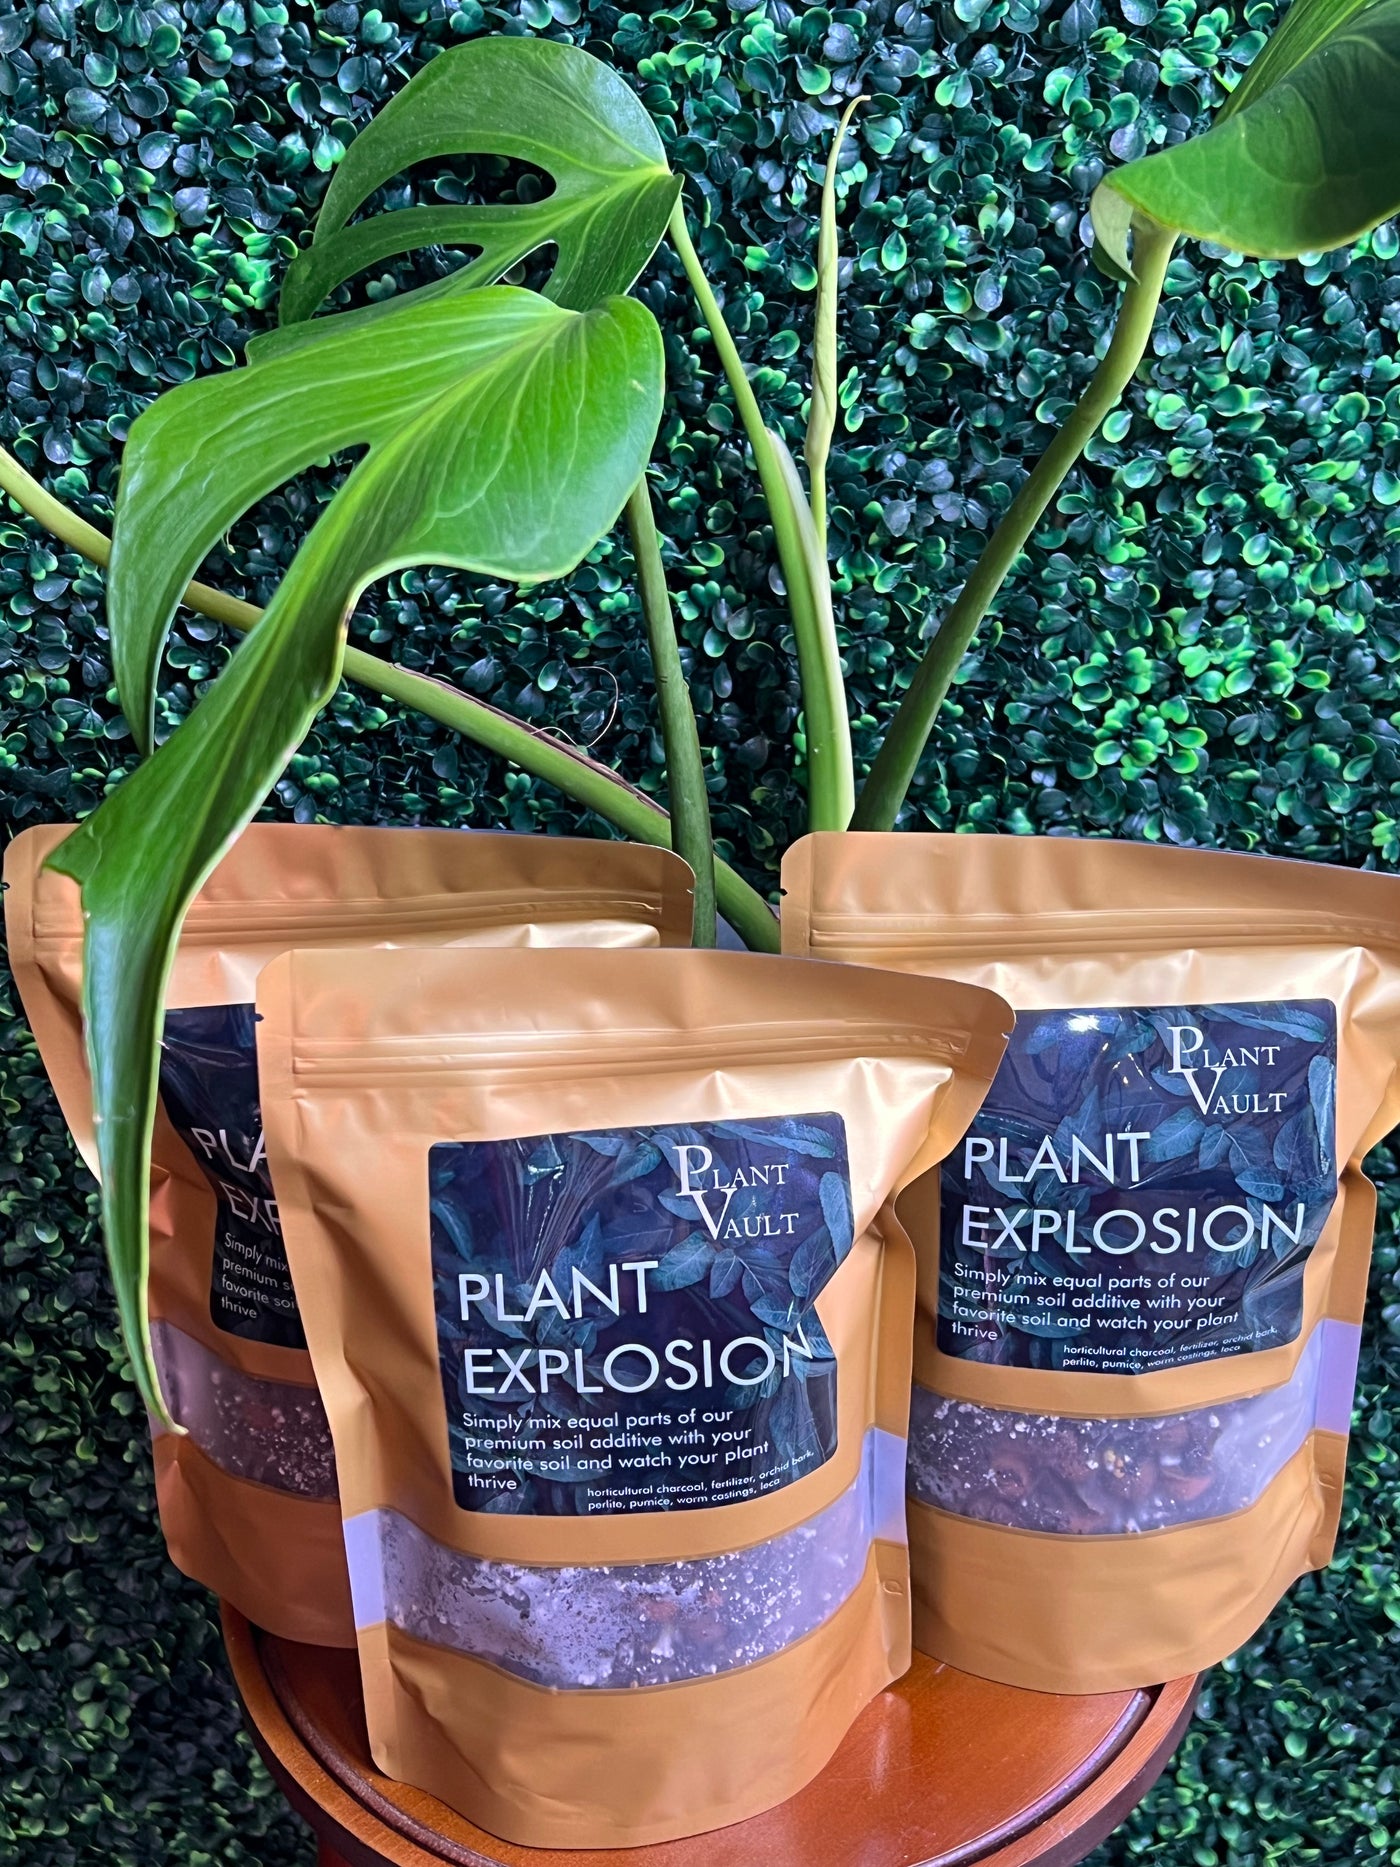 Introducing Plant Explosion - the ultimate chunky soil additive that will revolutionize your gardening experience! This exceptional blend of carefully selected ingredients, including horticultural charcoal, fertilizer, orchid bark, perlite, pumice, worm castings, and leca, is designed to enhance the vitality and growth of your beloved plants.